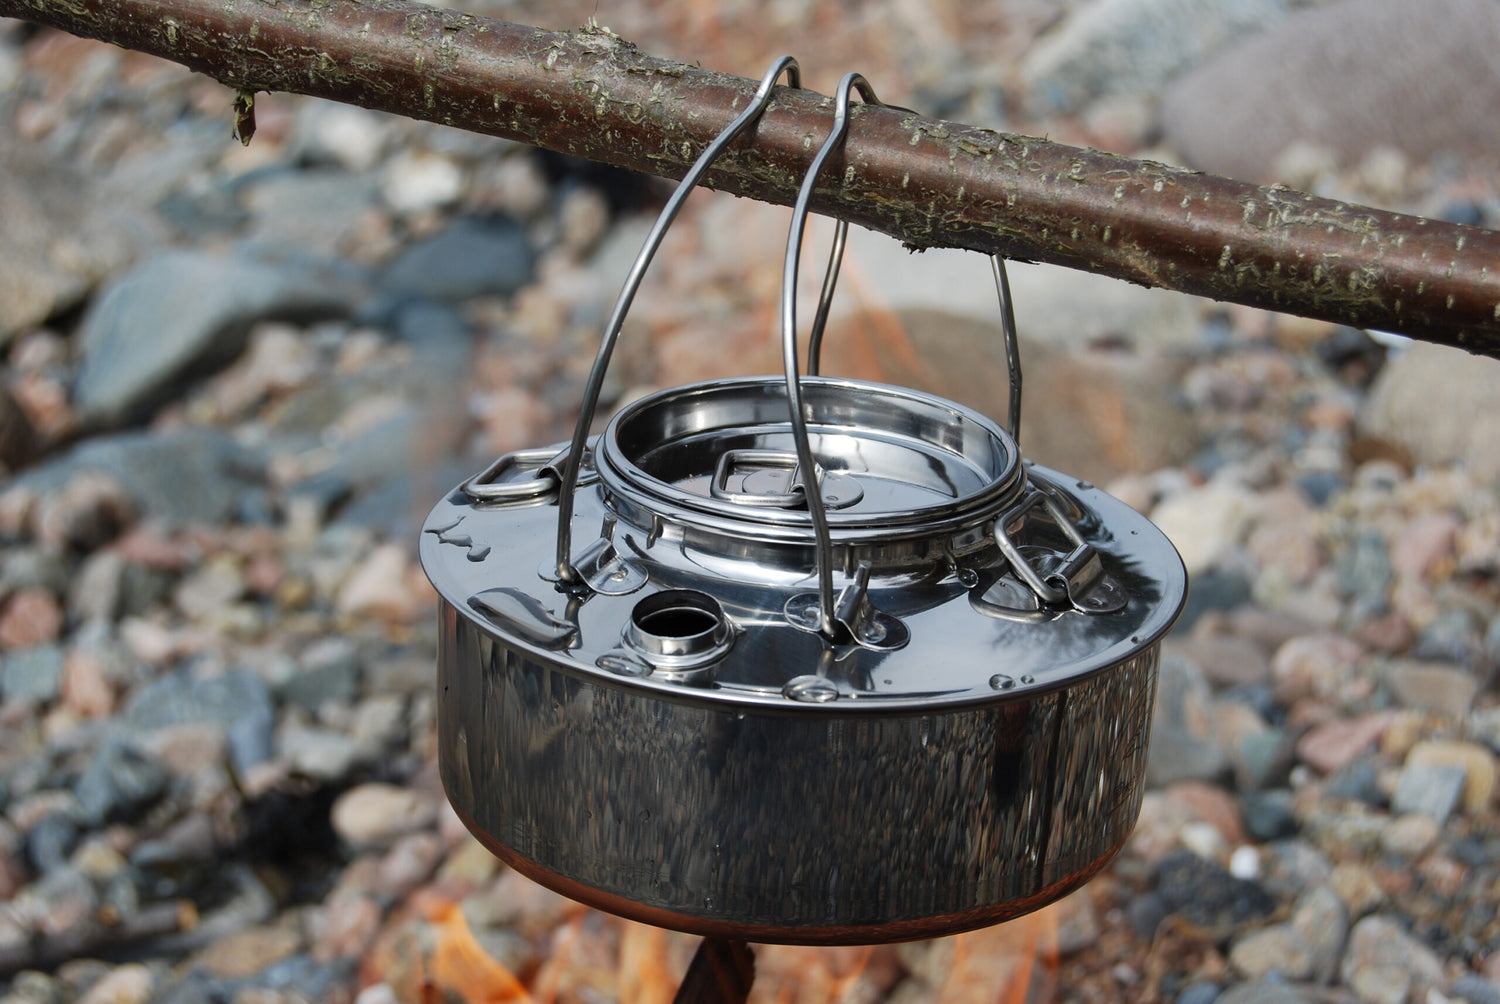 EAGLE Products Campfire Kettle 0.7L/1.5L [イーグルプロダクツ キャンプファイヤーケトル 0.7L/